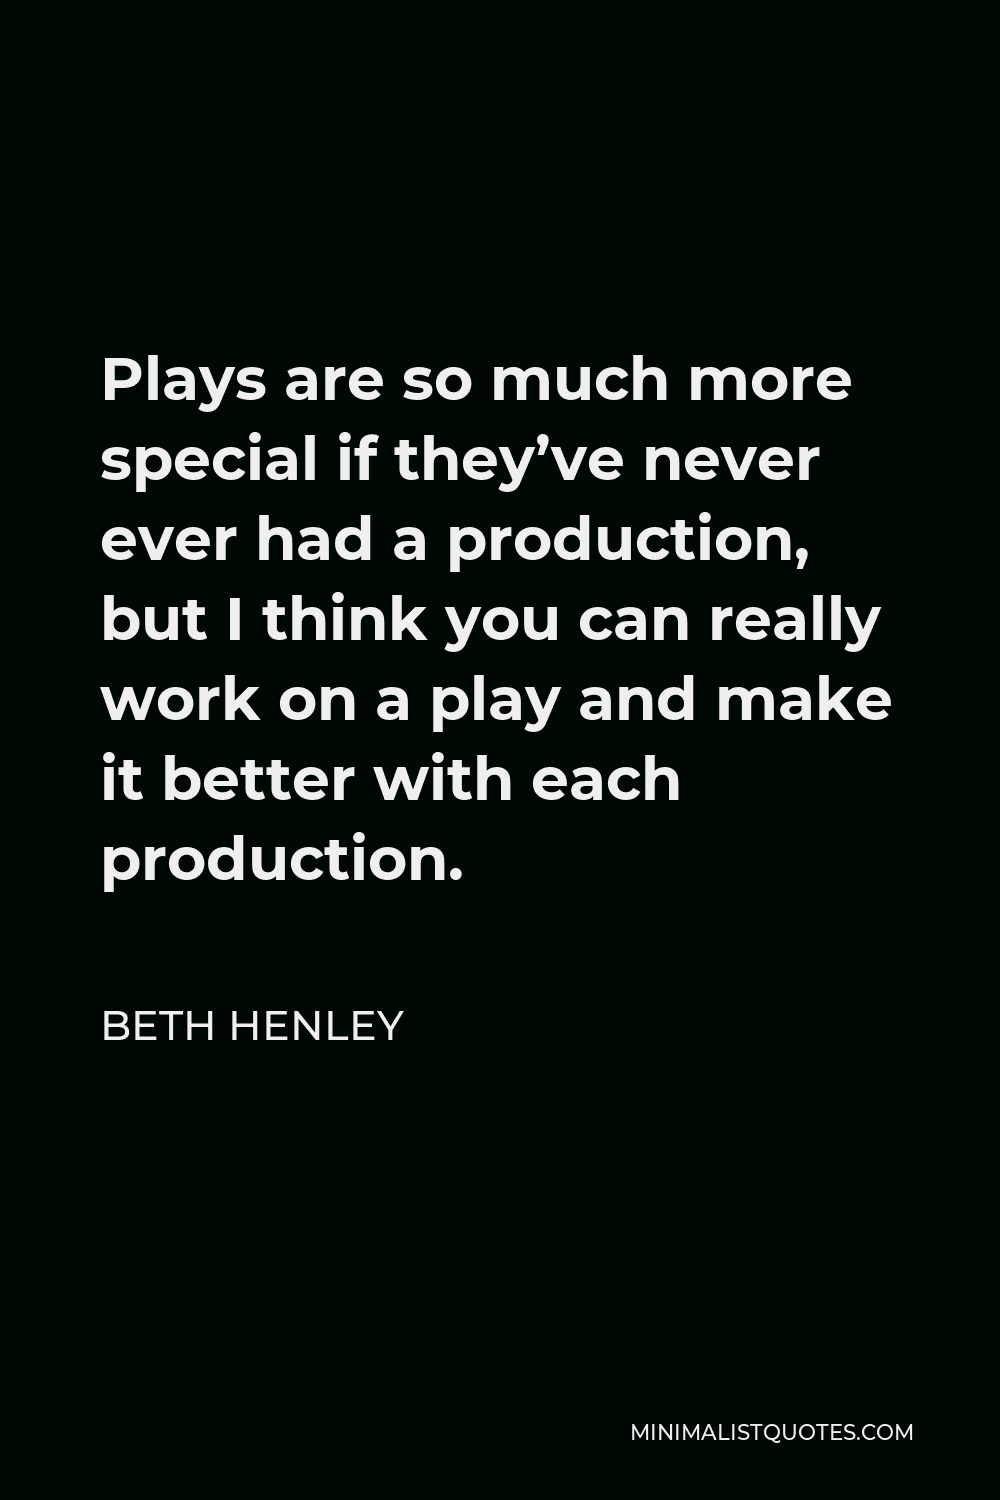 Beth Henley Quote - Plays are so much more special if they’ve never ever had a production, but I think you can really work on a play and make it better with each production.